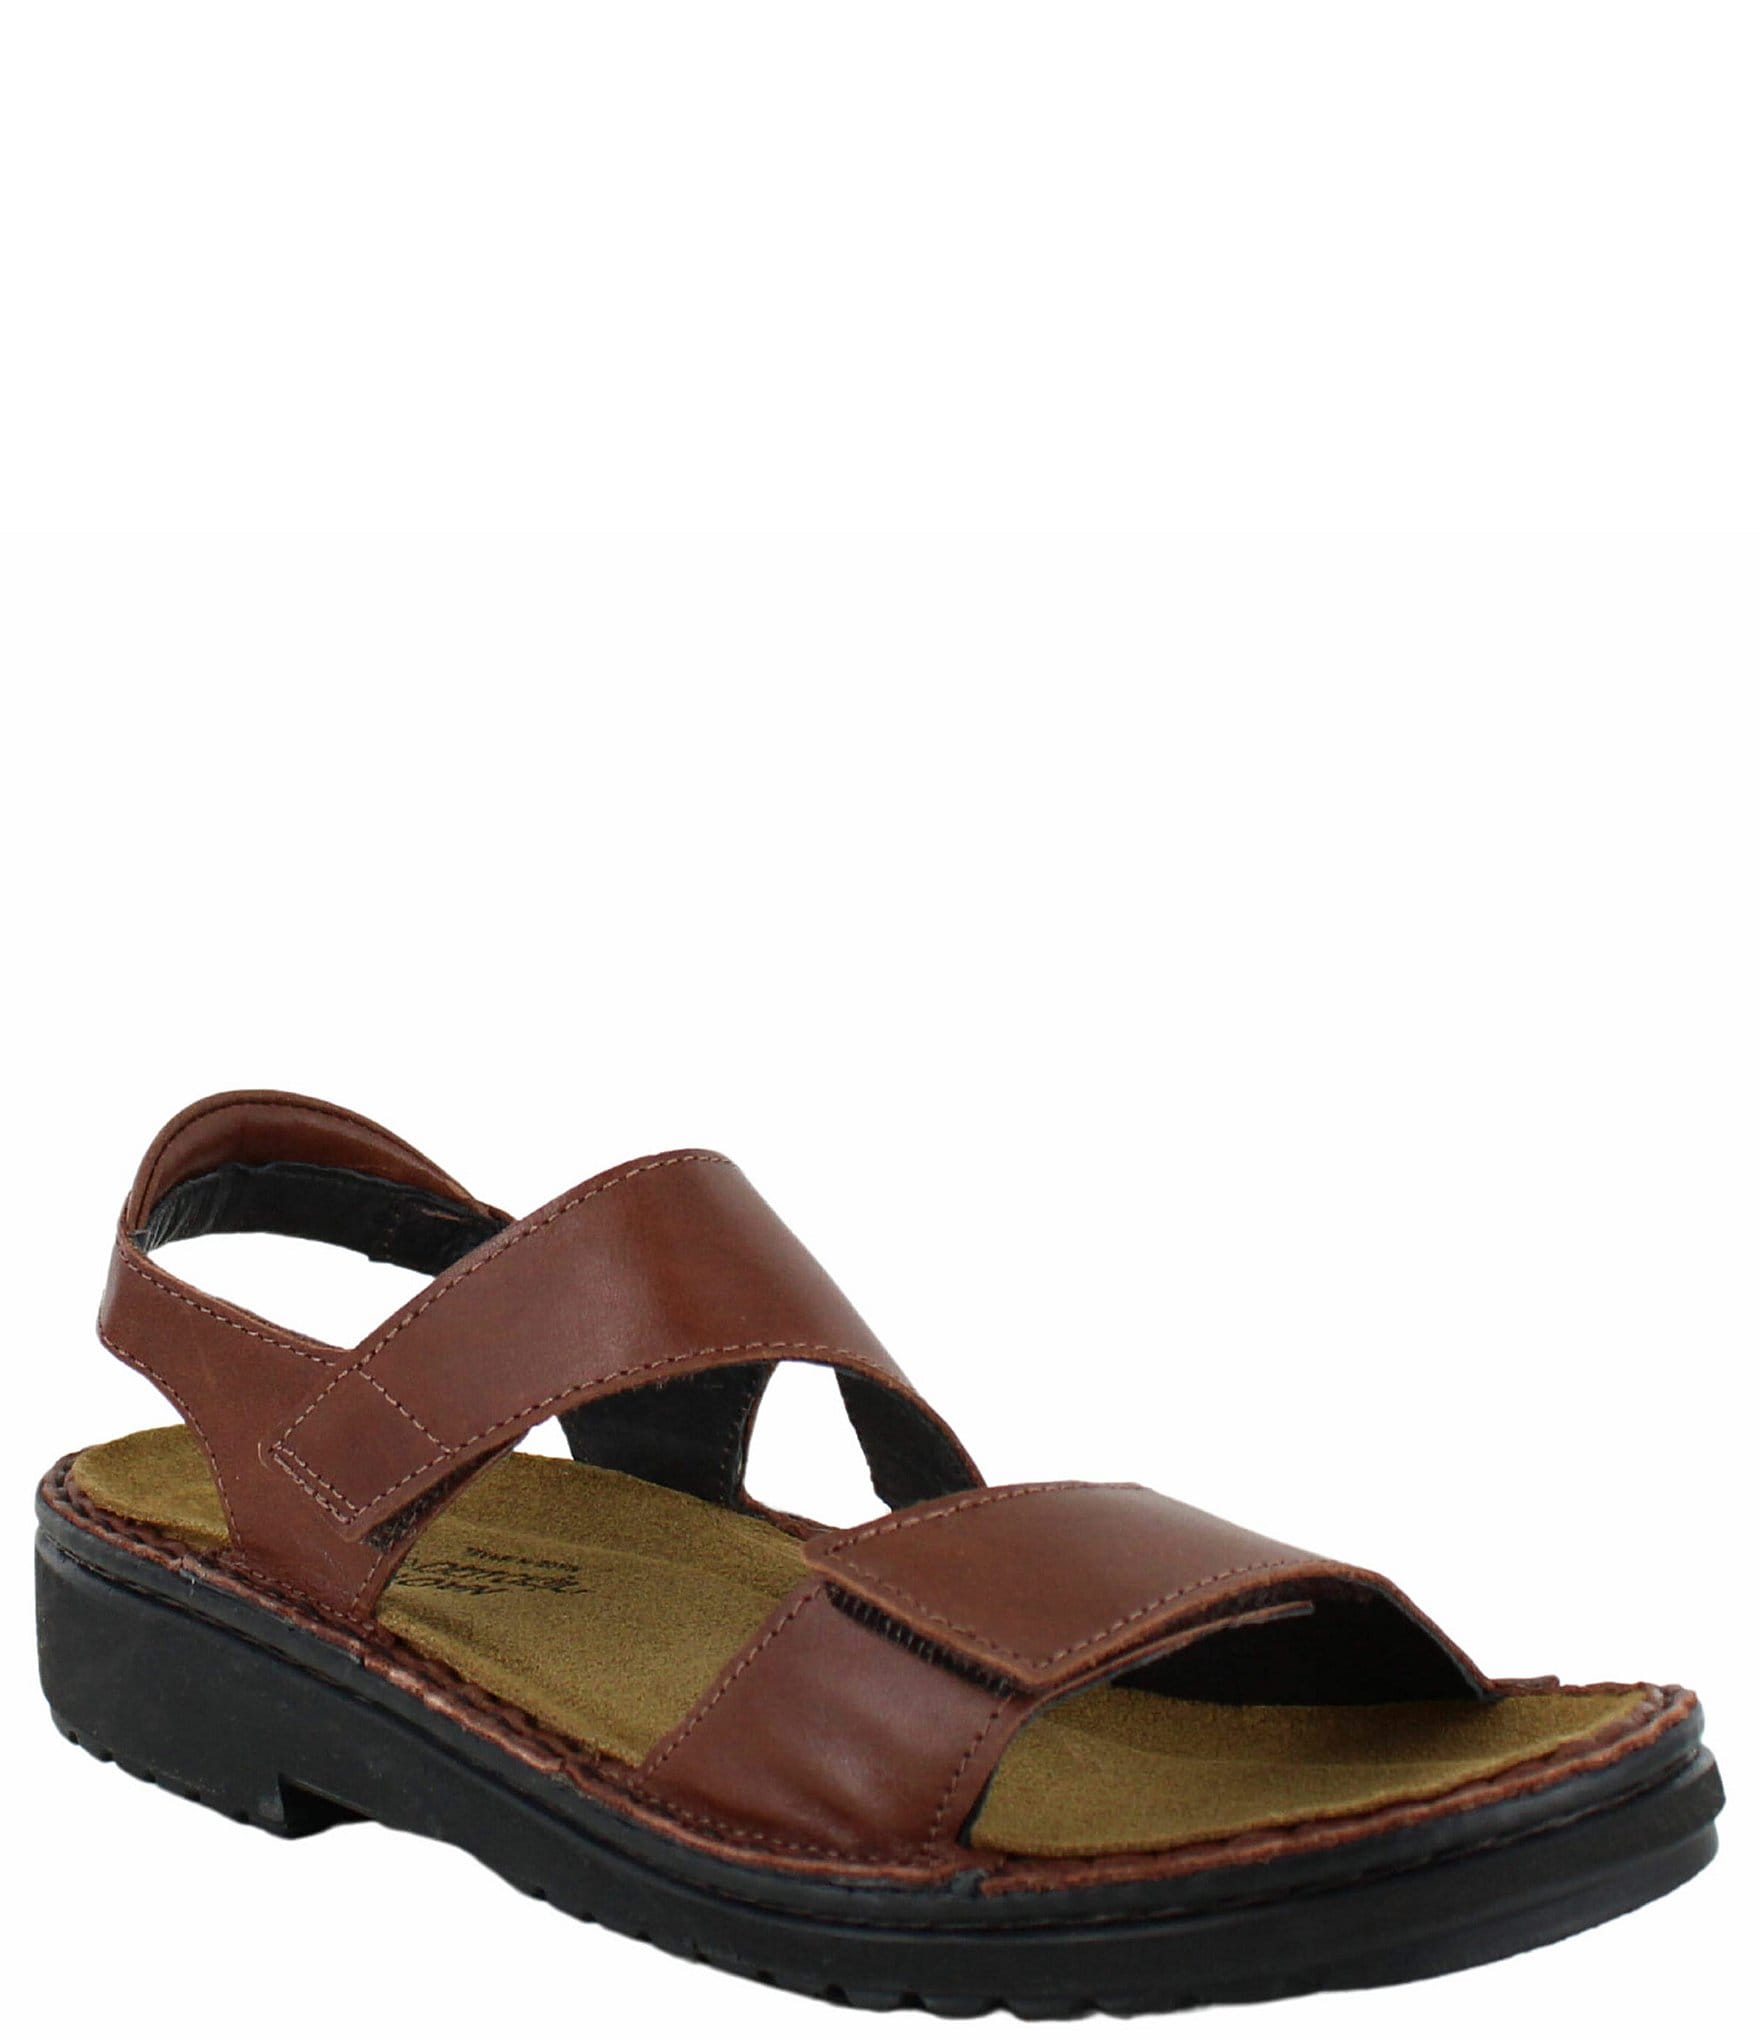 Naot Enid Banded Sandals | Dillard's